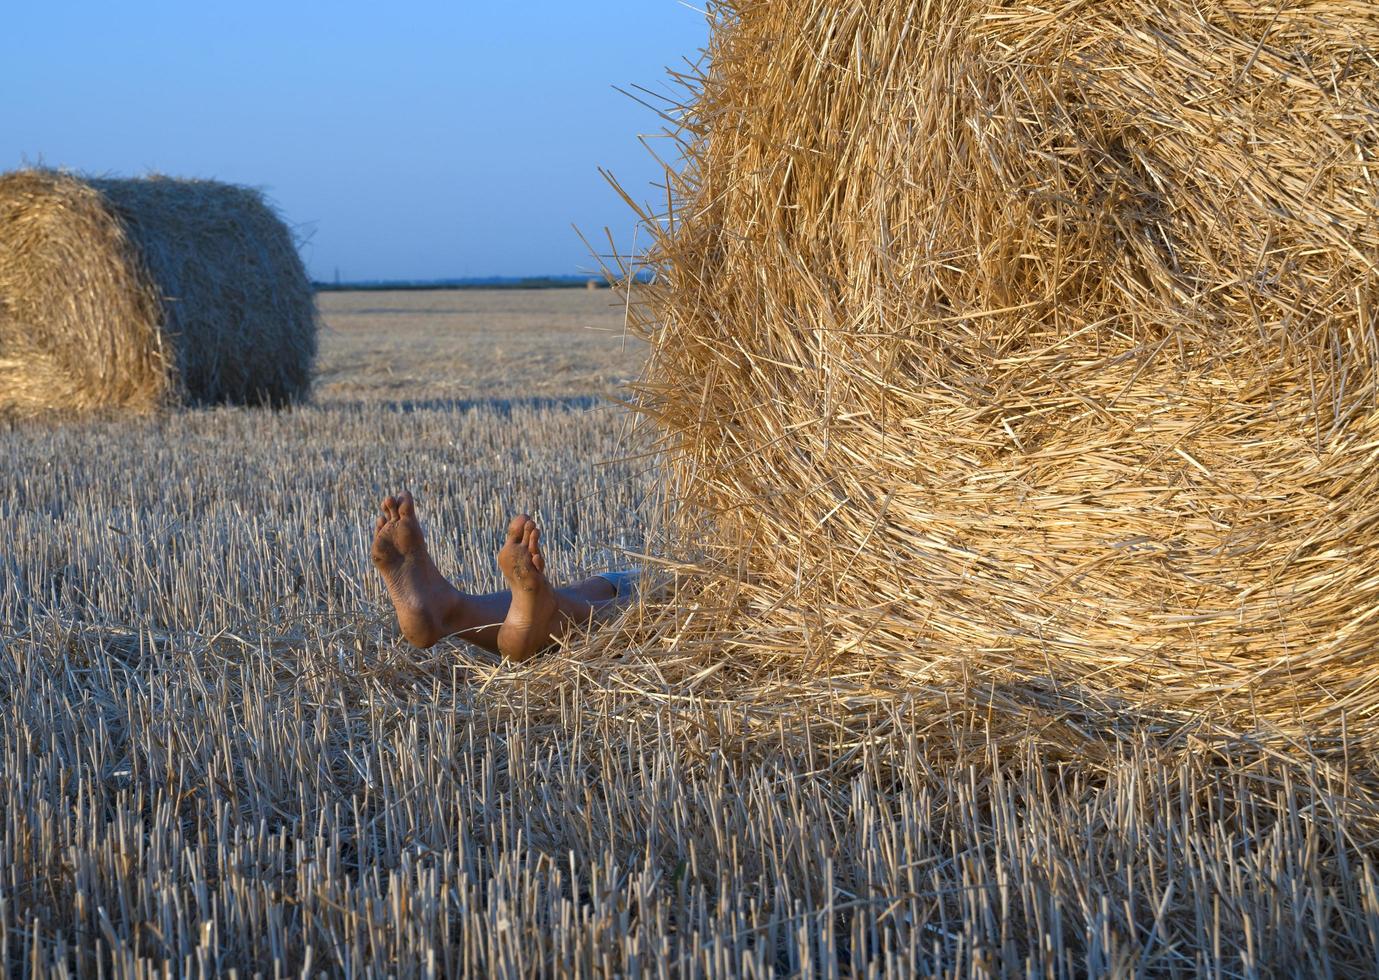 Legs of a person lying down from behind a bale of straw on a farm field photo